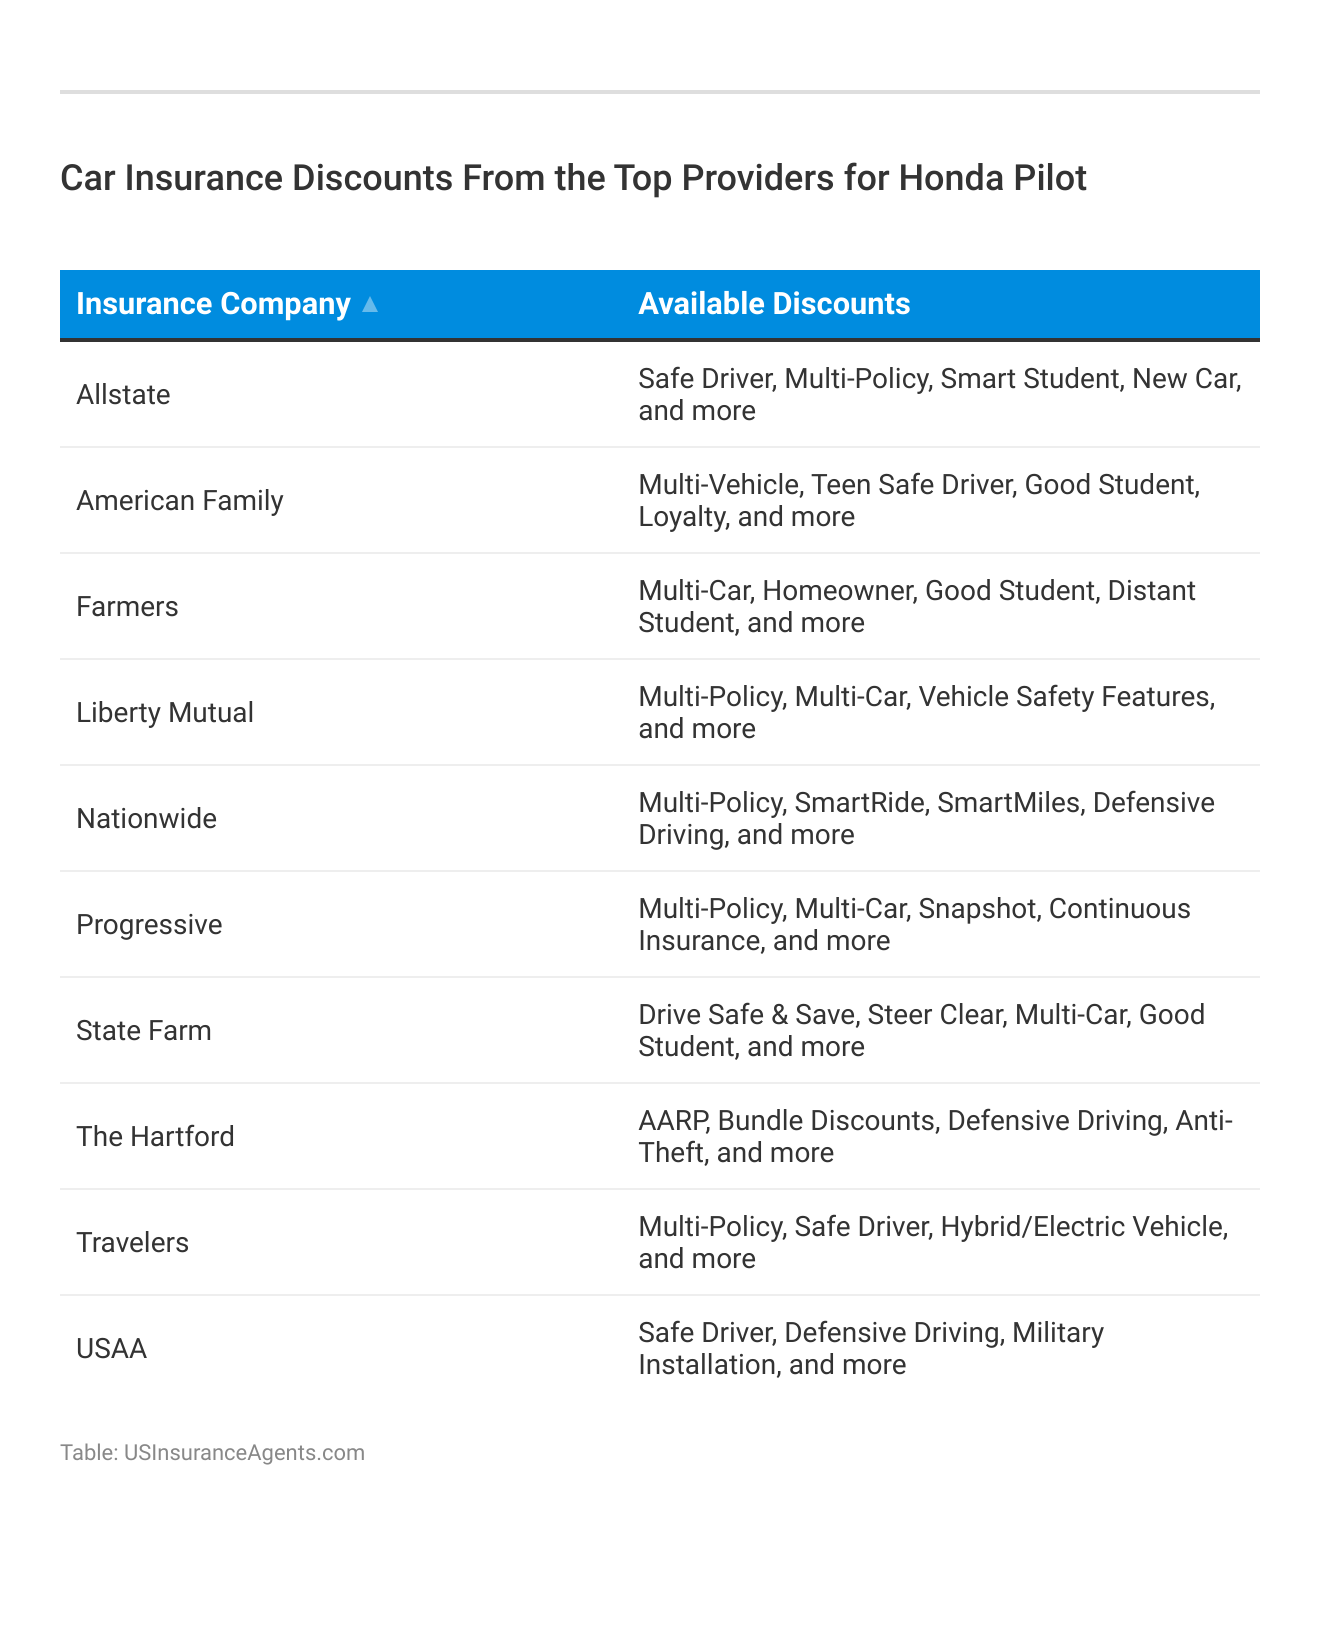 <h3>Car Insurance Discounts From the Top Providers for Honda Pilot</h3>